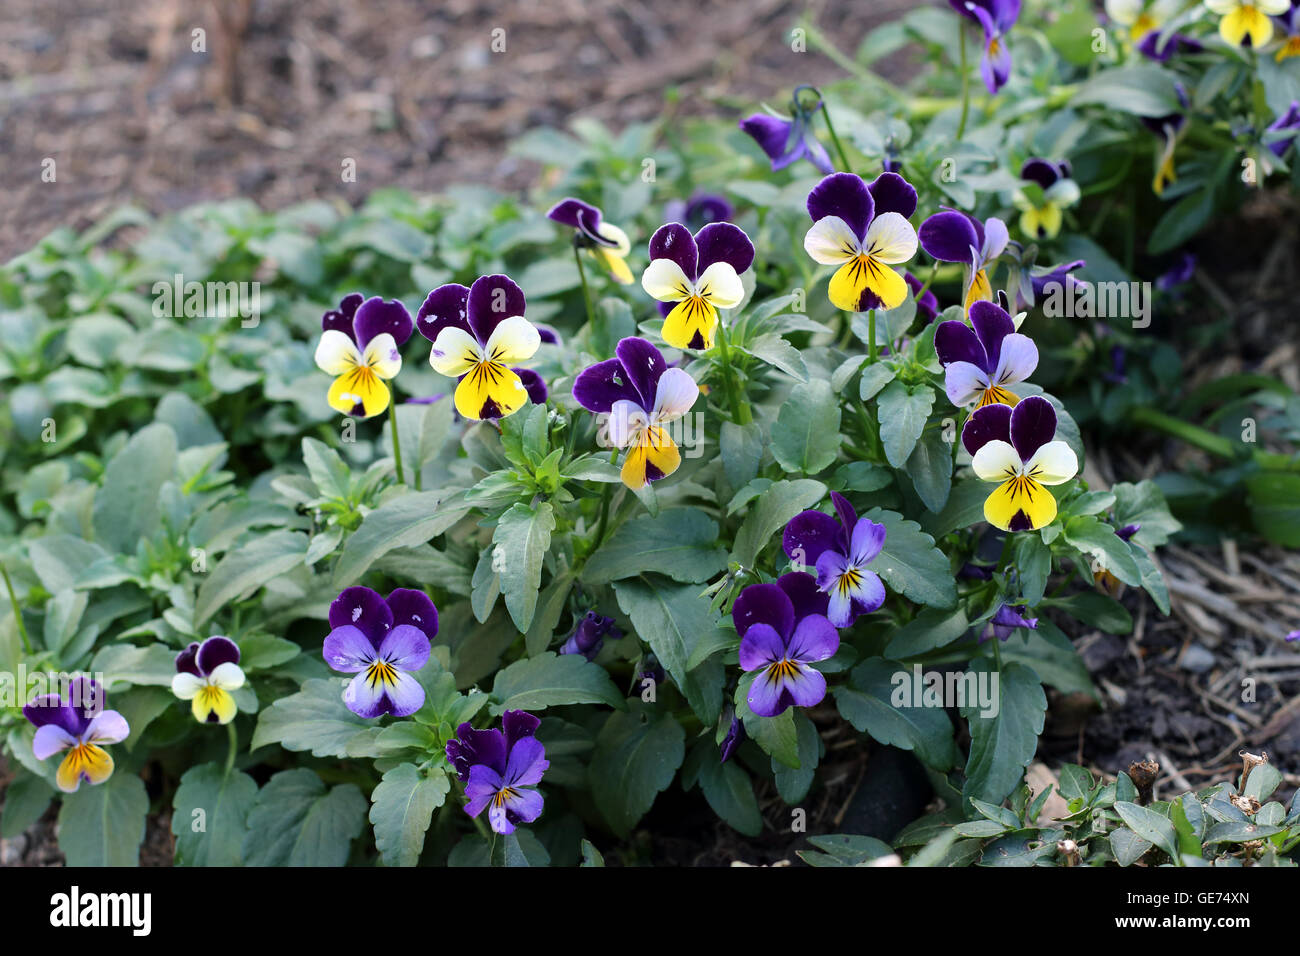 Viola tricolor, or Viola cornuta or also known as Viola Johnny Jump Up an edible flower used in salad. Stock Photo